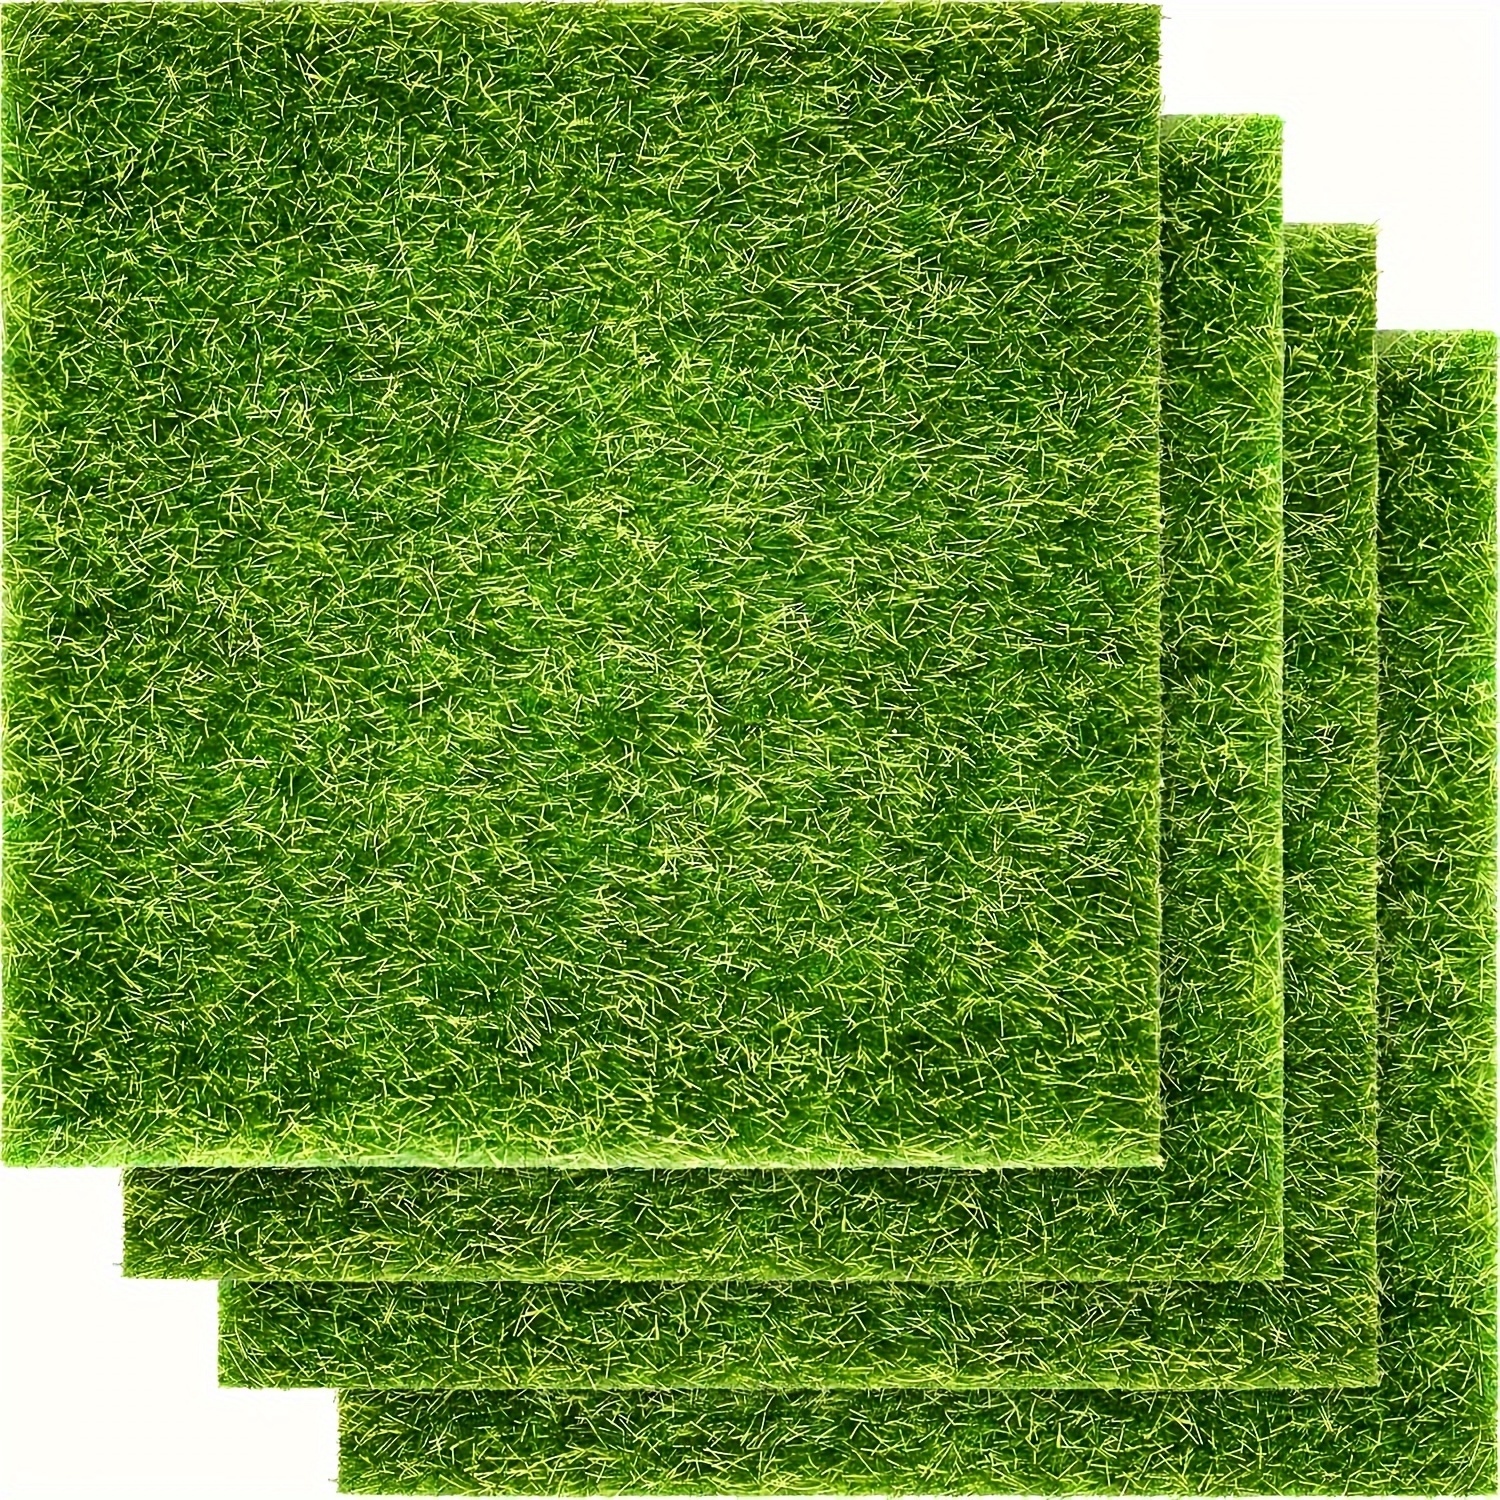 

4pcs Artificial Grass Mats 6x6 Inch, Plastic Fake Grass For Fairy Gardens, Miniature Dollhouse Decor, Diy Craft Projects, Party Supplies & Holiday Accessories, 10mm Fiber Height Lawn Pads